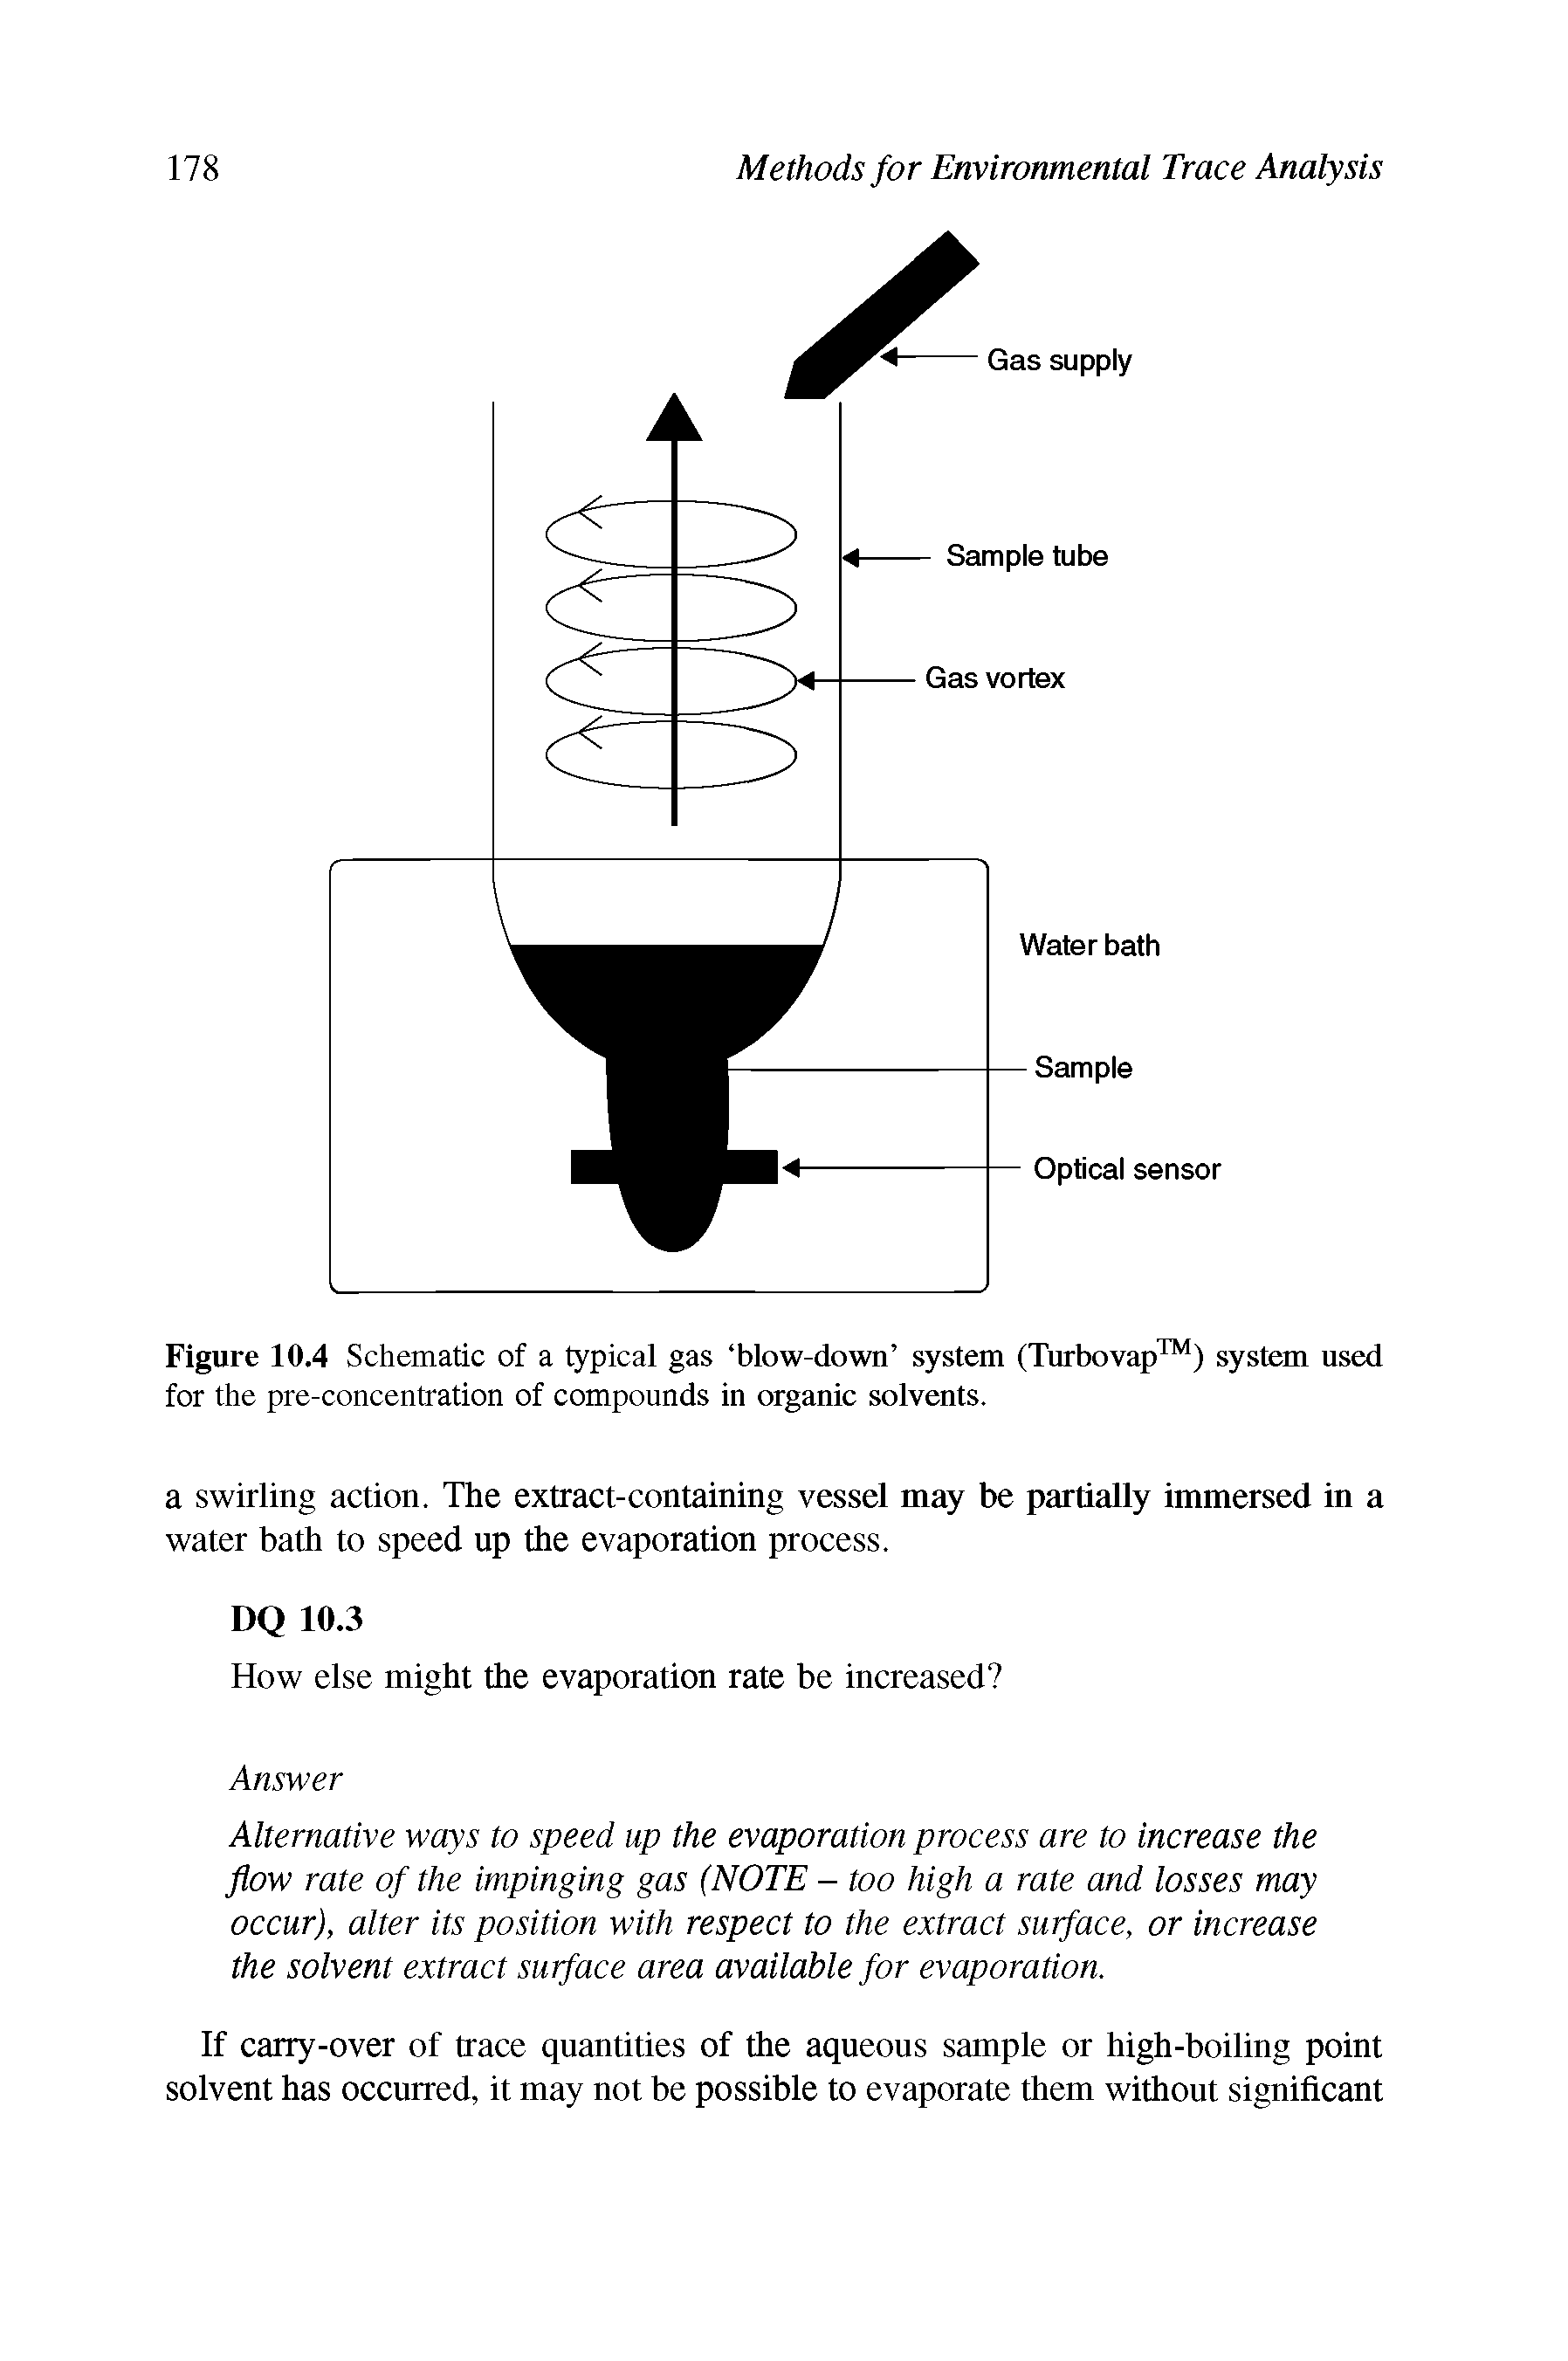 Figure 10.4 Schematic of a typical gas blow-down system (Turbovap ) system used for the pre-concentration of compounds in organic solvents.